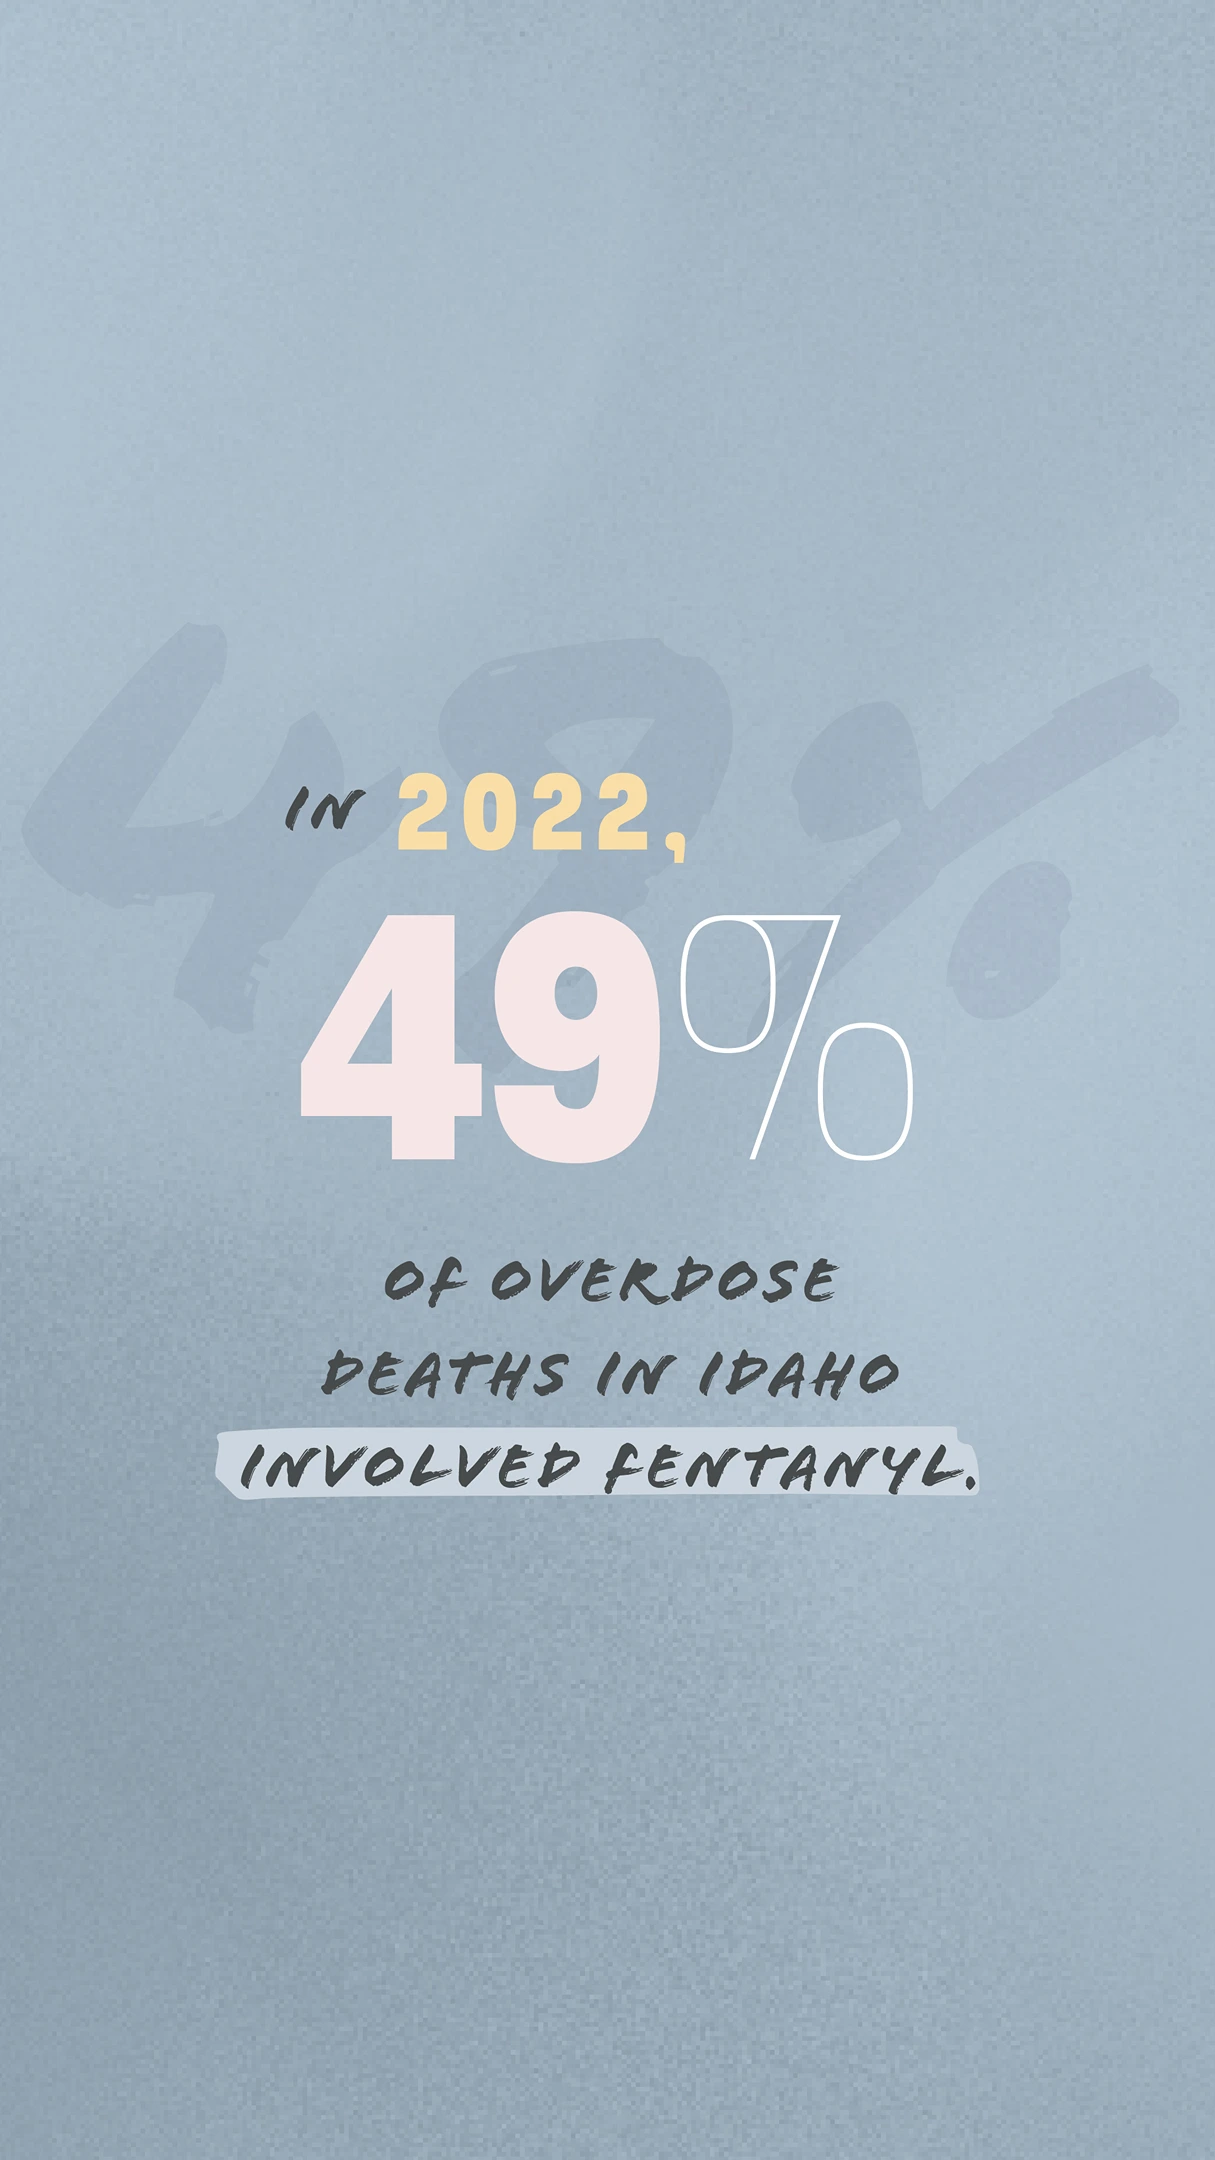 In 2022, 49% of overdose deaths in Idaho involved fentanyl.